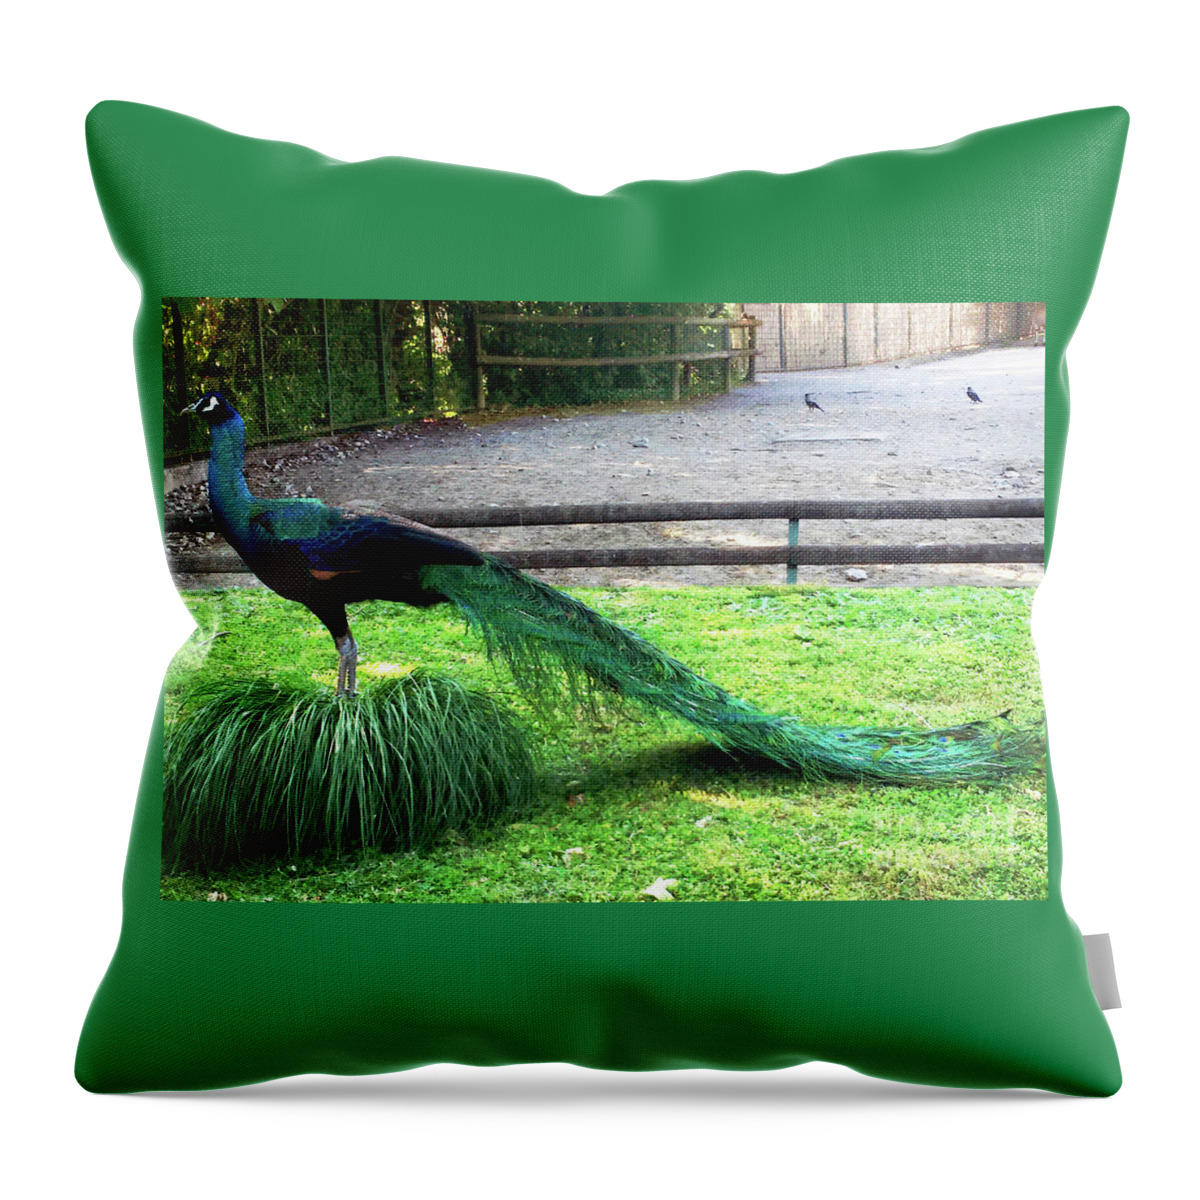 Park Throw Pillow featuring the photograph Peacock by Jasna Dragun